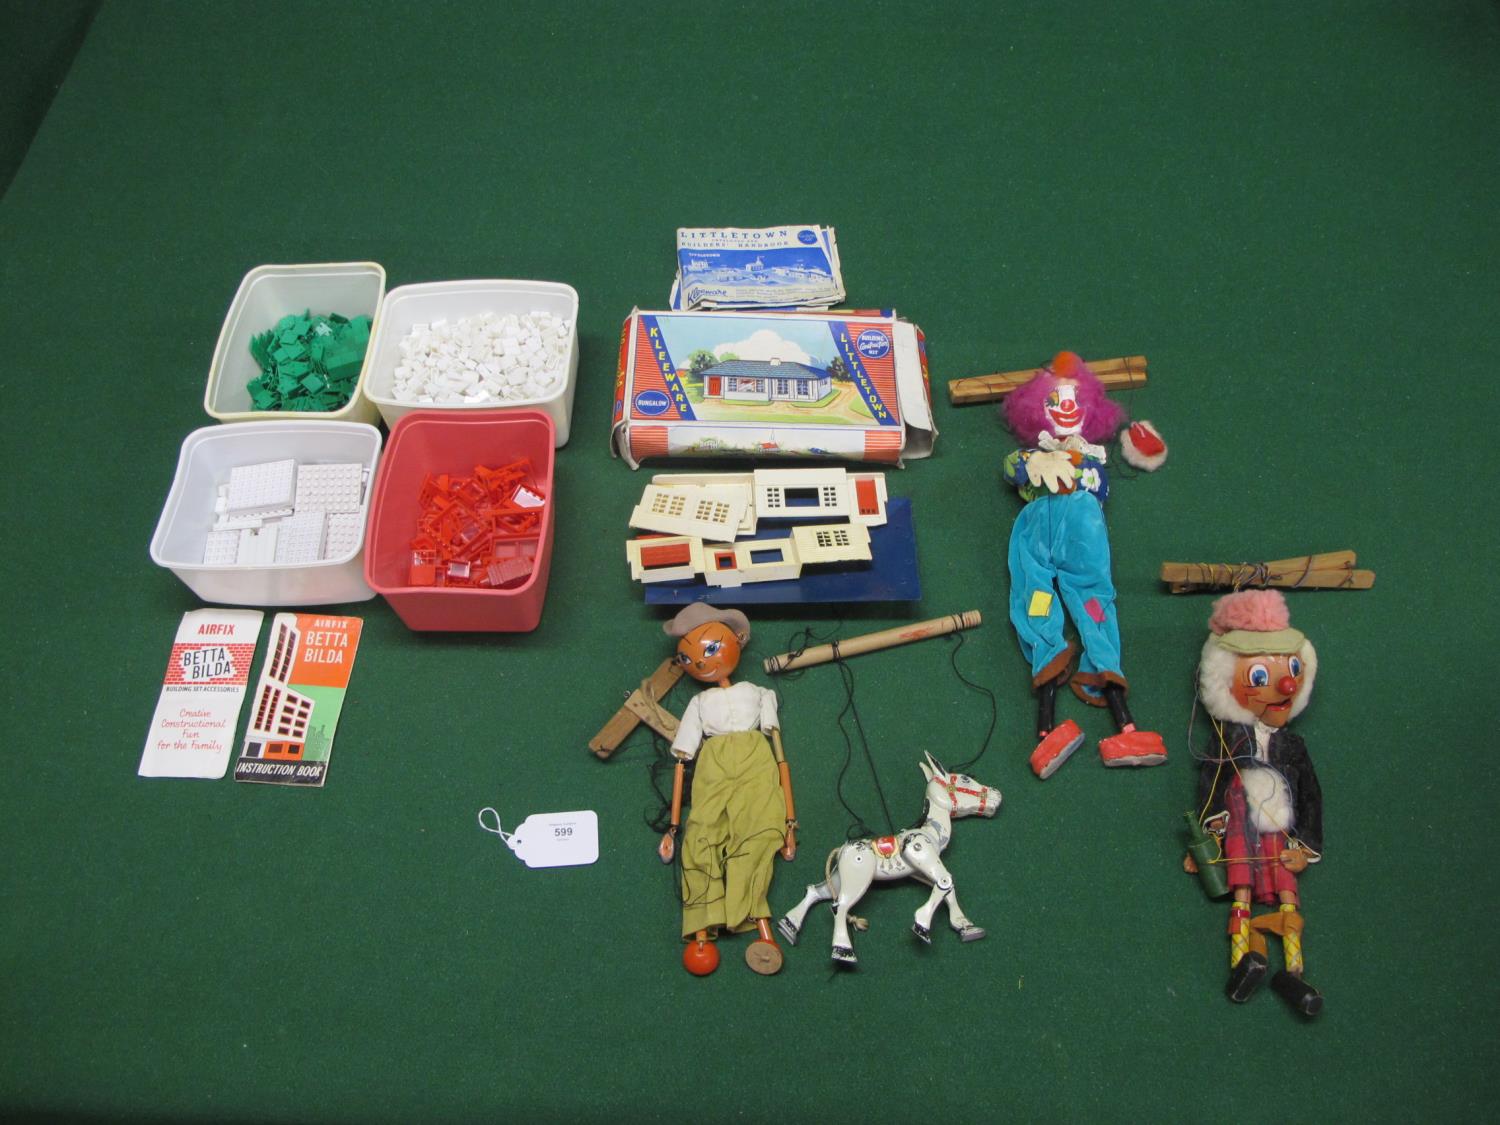 Two Pelham Puppets, a homemade clown puppet and Muffin The Mule together with loose Airfix Betta